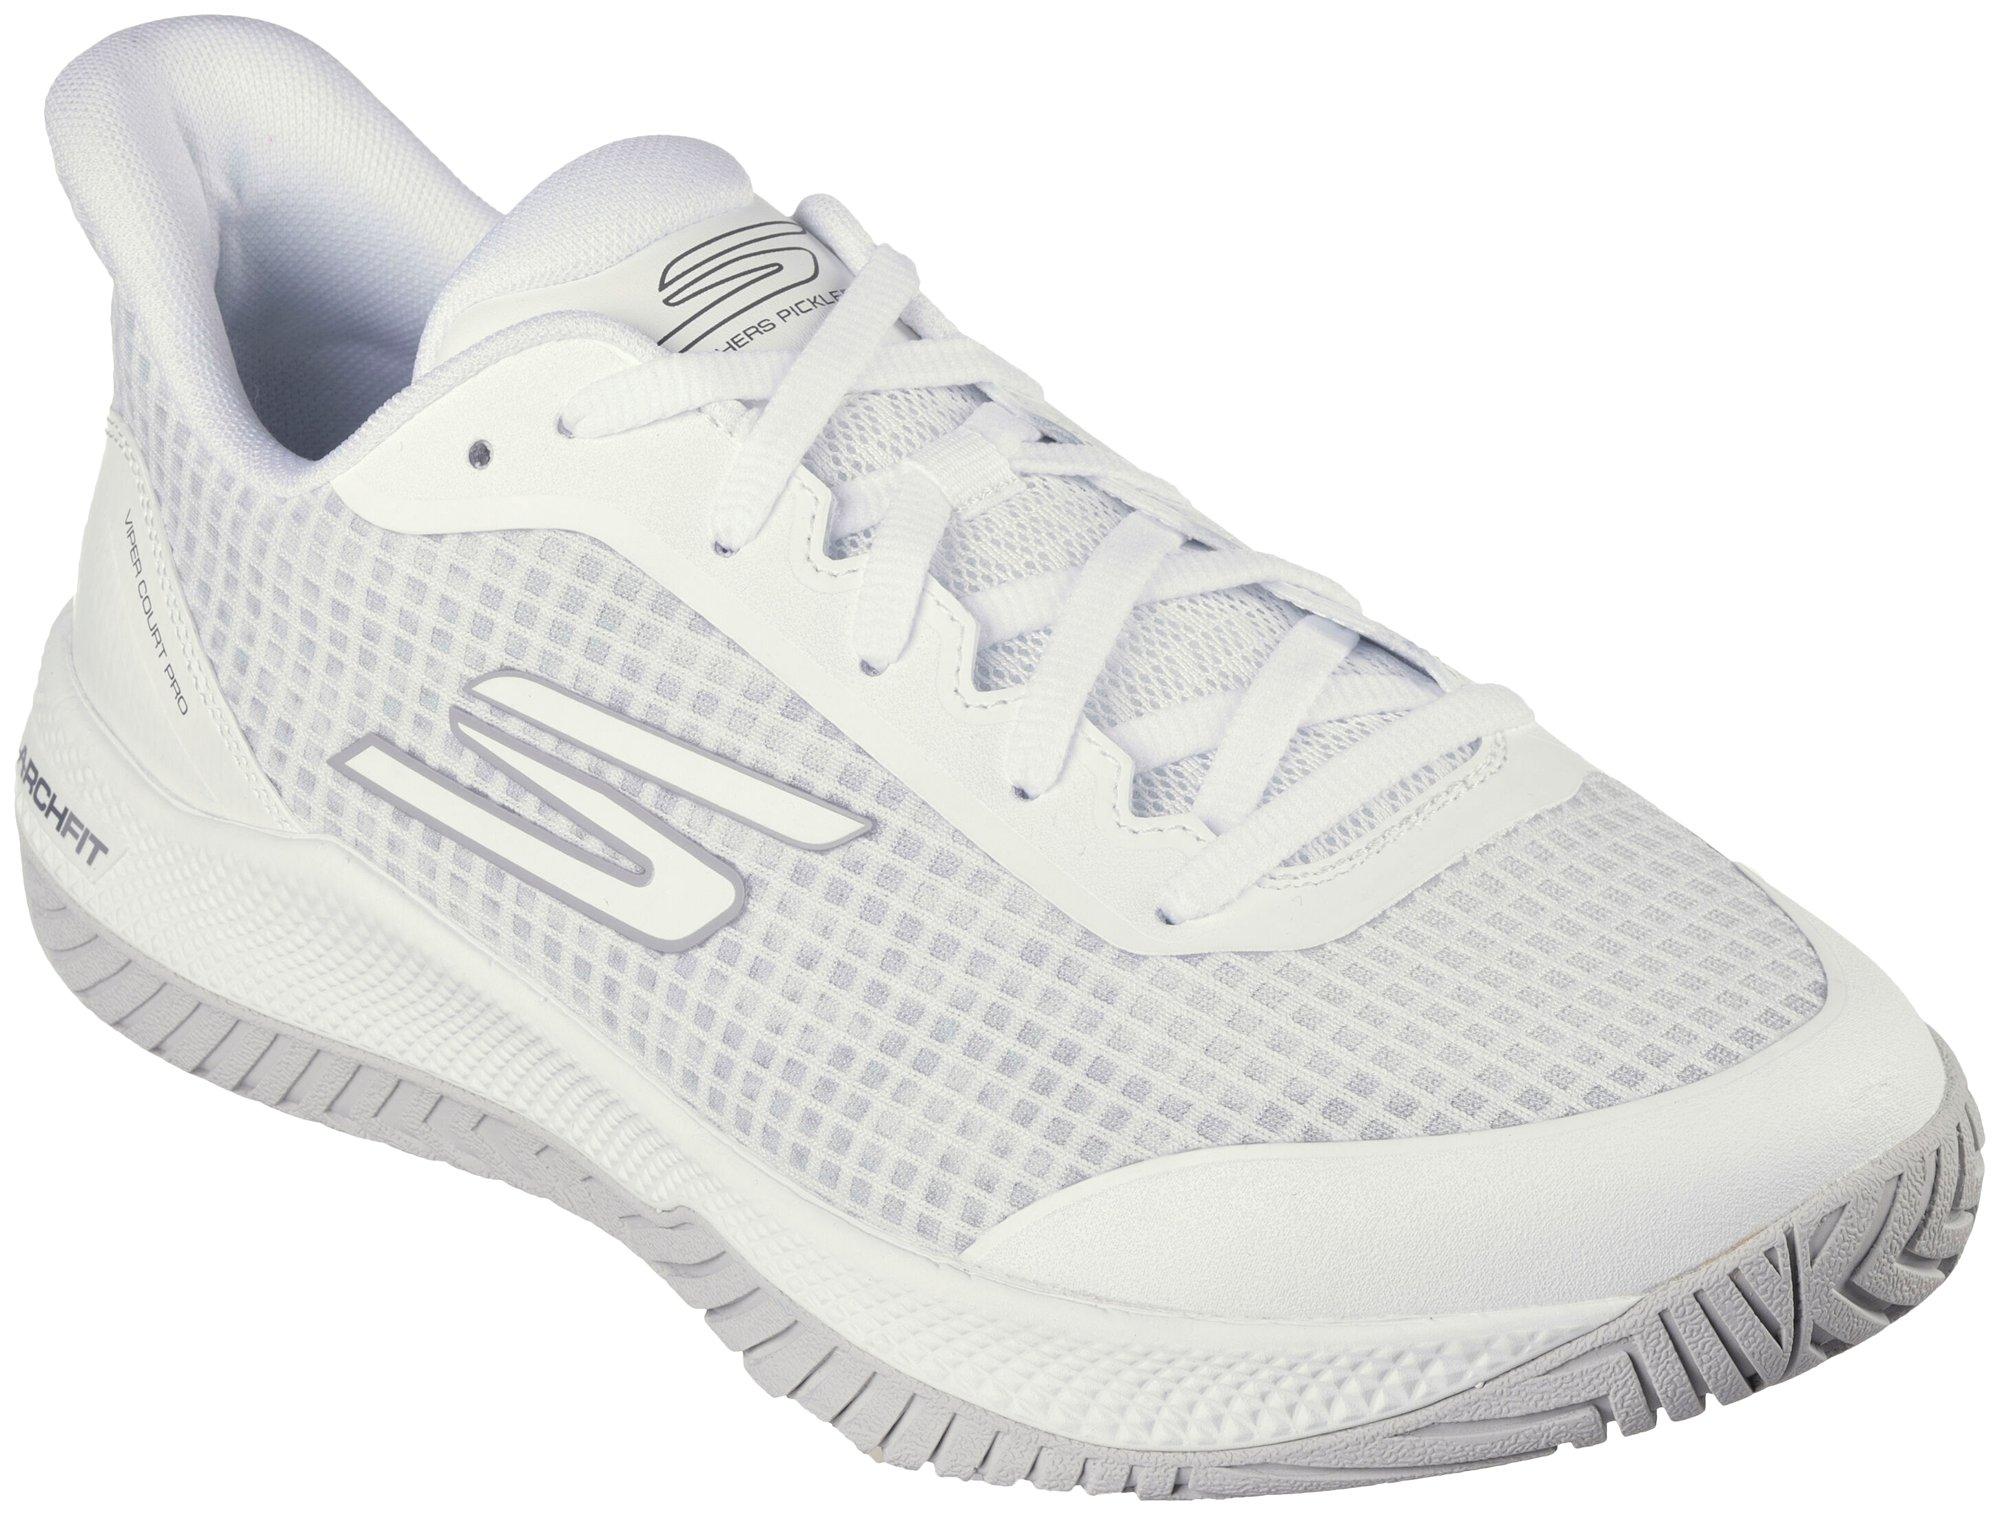 Skechers Mens Viper Court Pro Pickleball Arch Fit Shoes